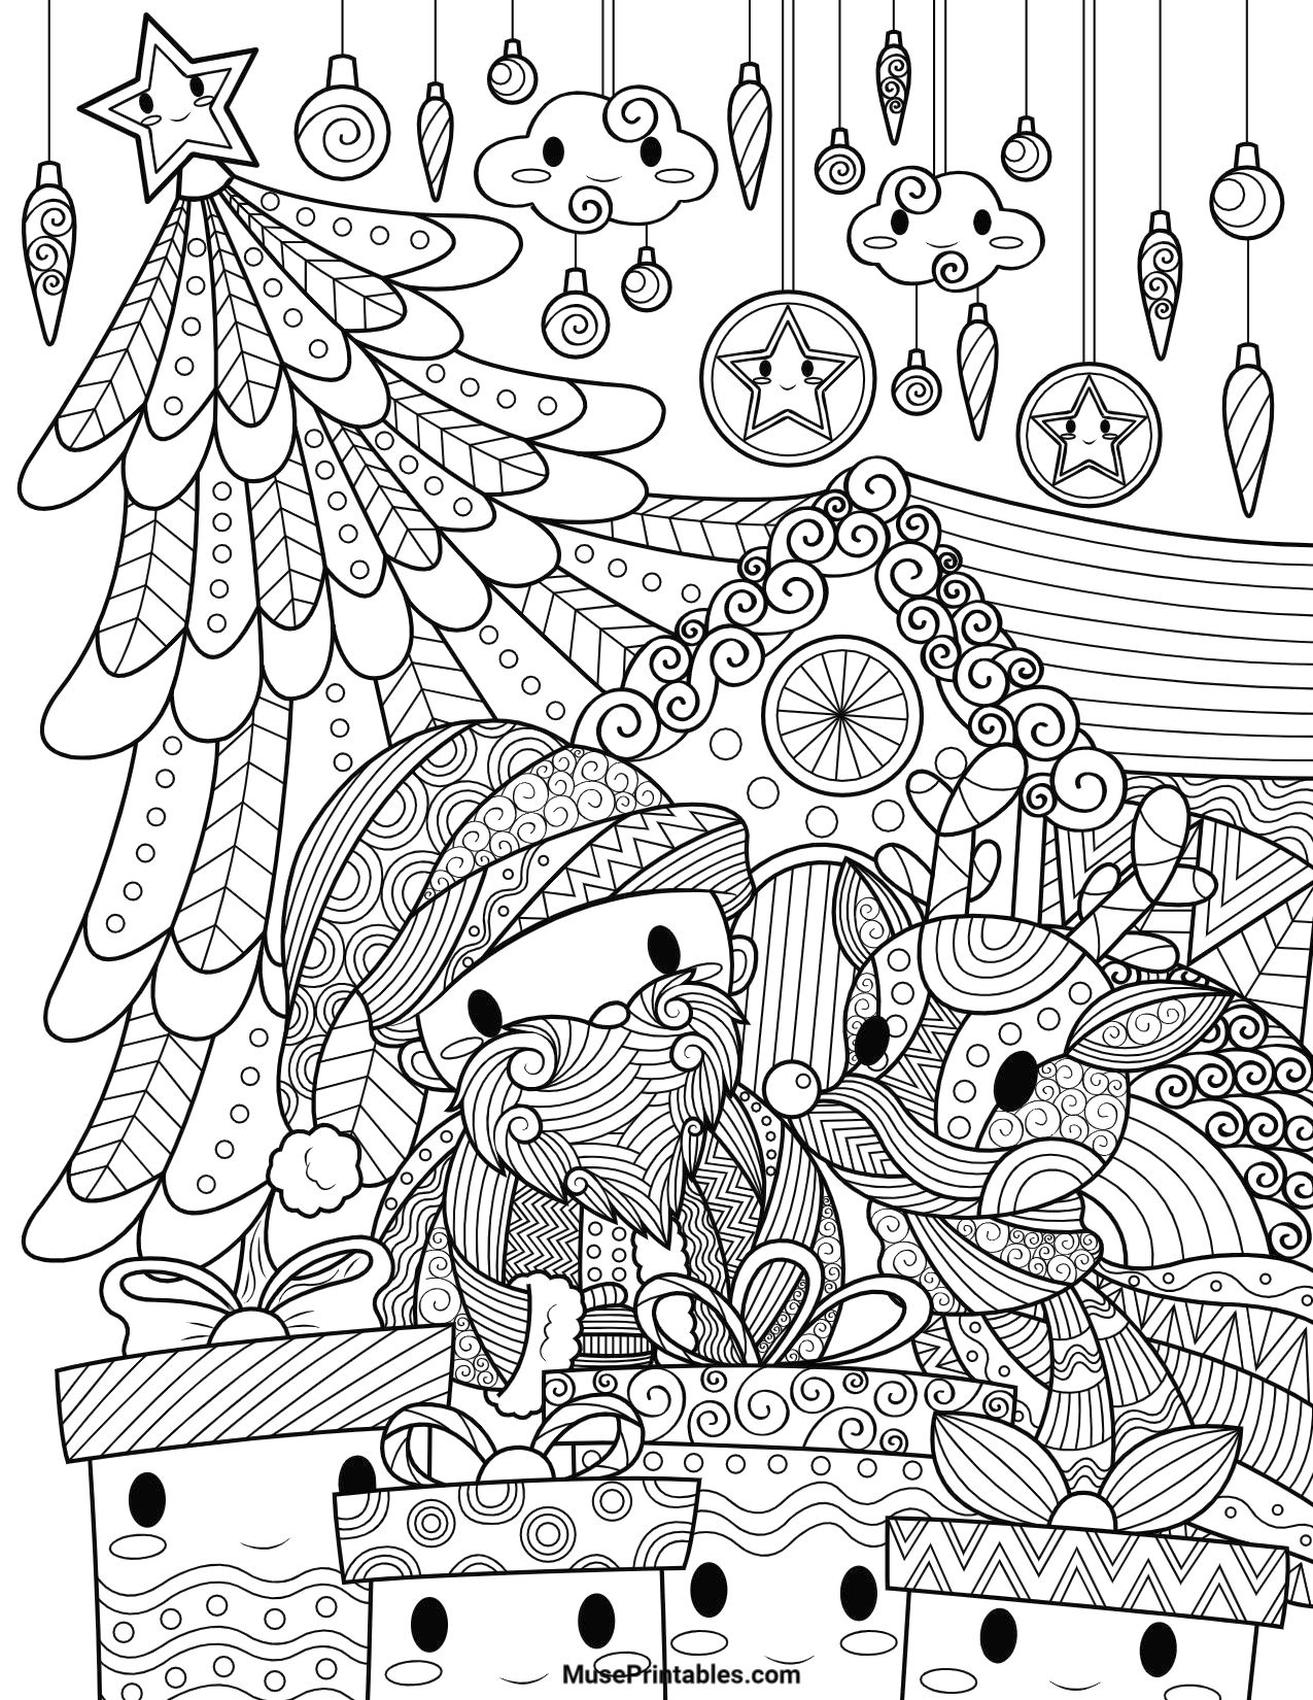 Get This Kawaii Coloring Pages Christmas for Adults